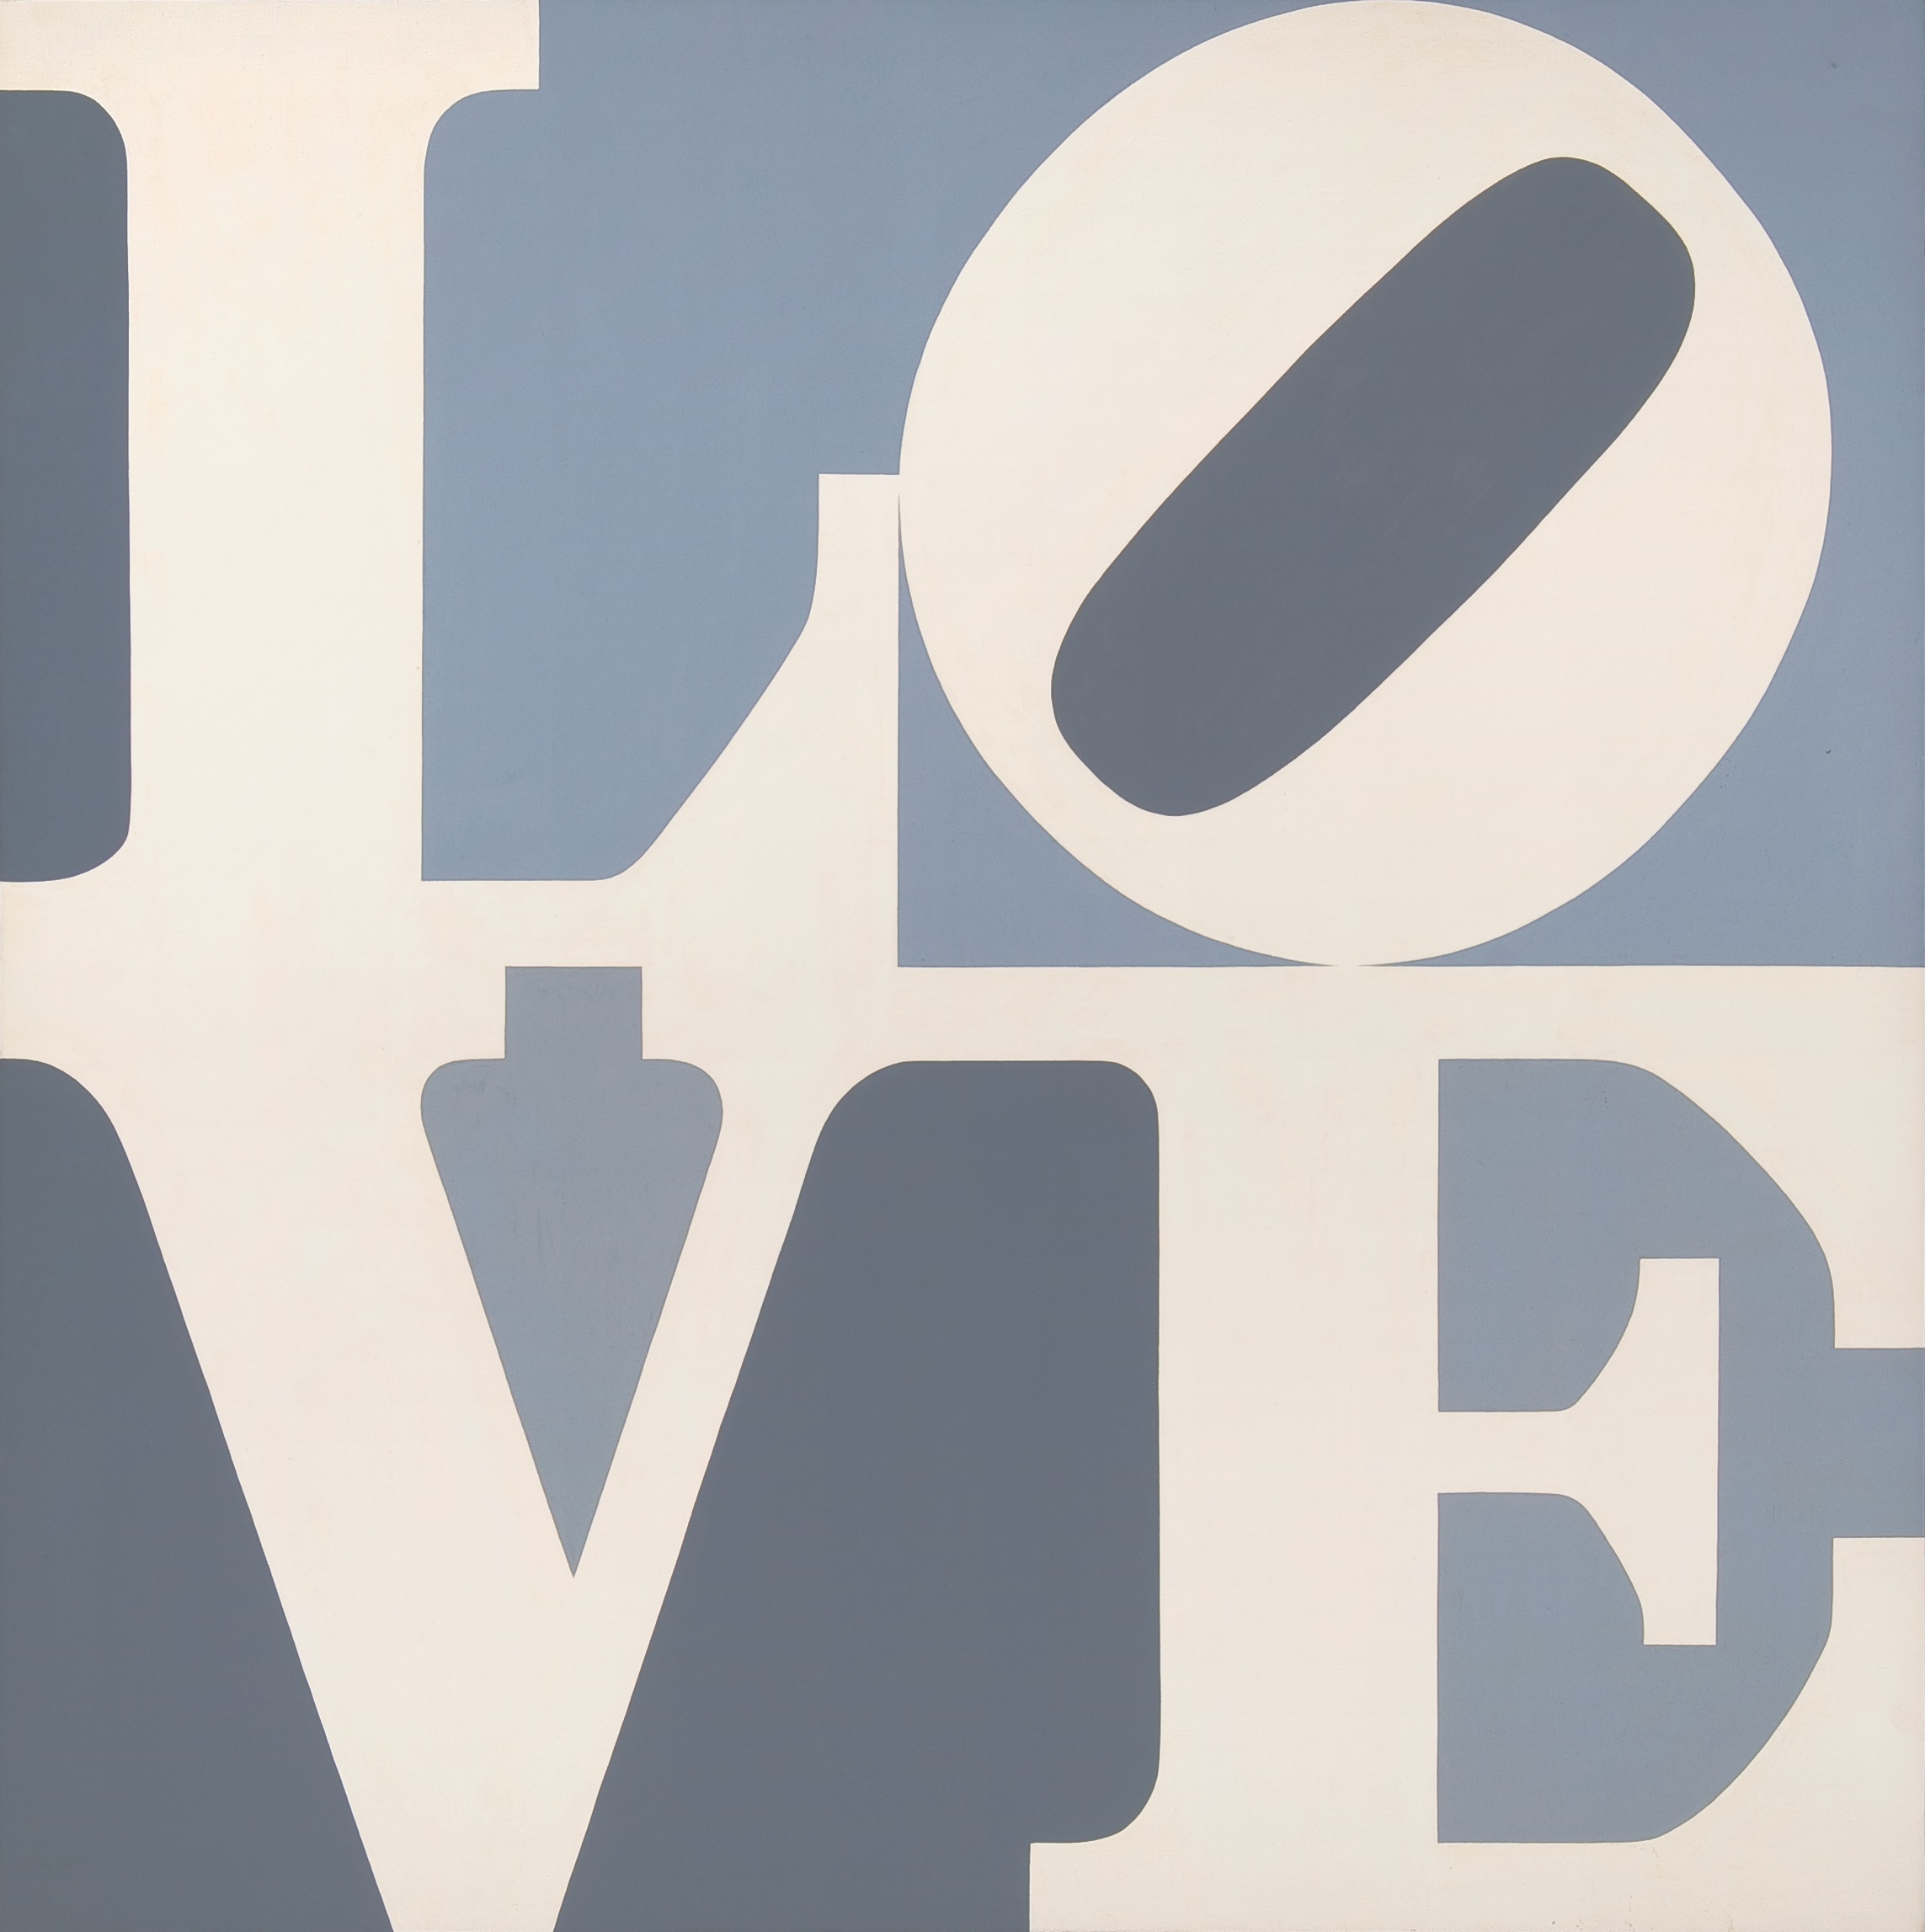 A grey and white pop art print made up of the letters L O V E